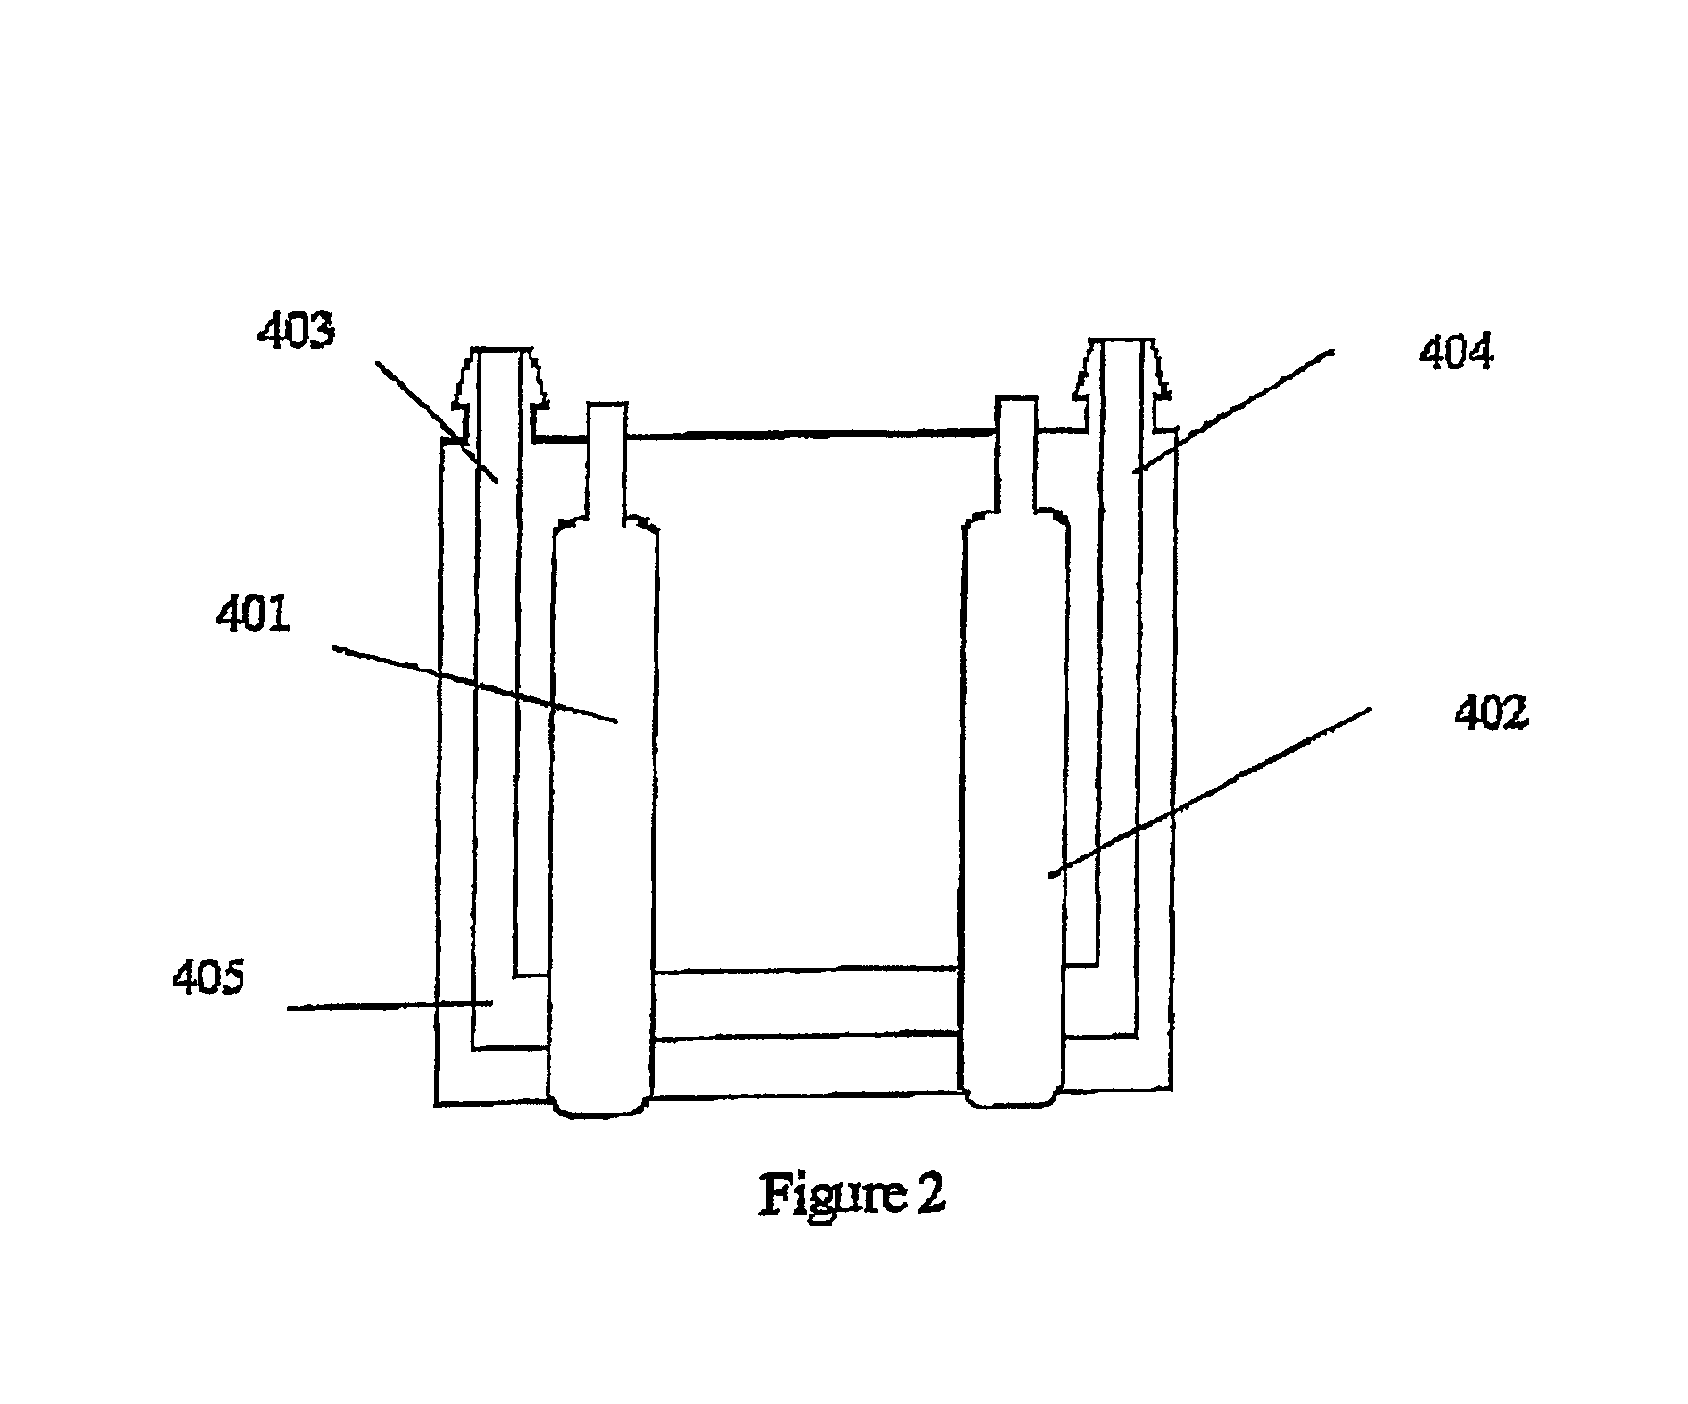 System and method for skin treatment using electrical current